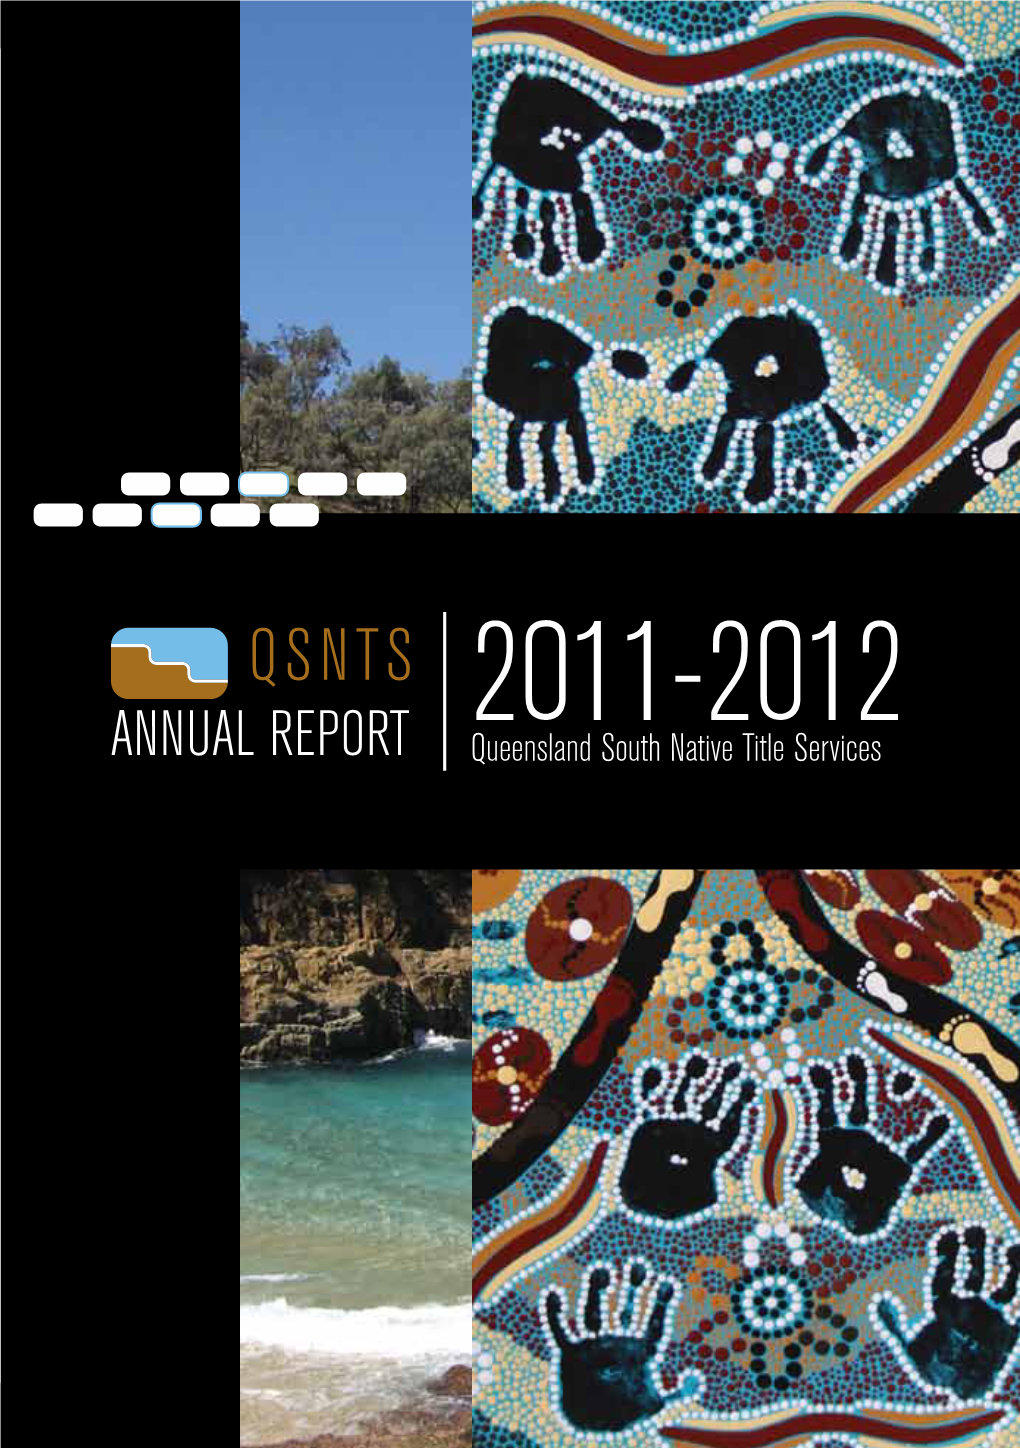 ANNUAL REPORT Queensland South Native Title Services